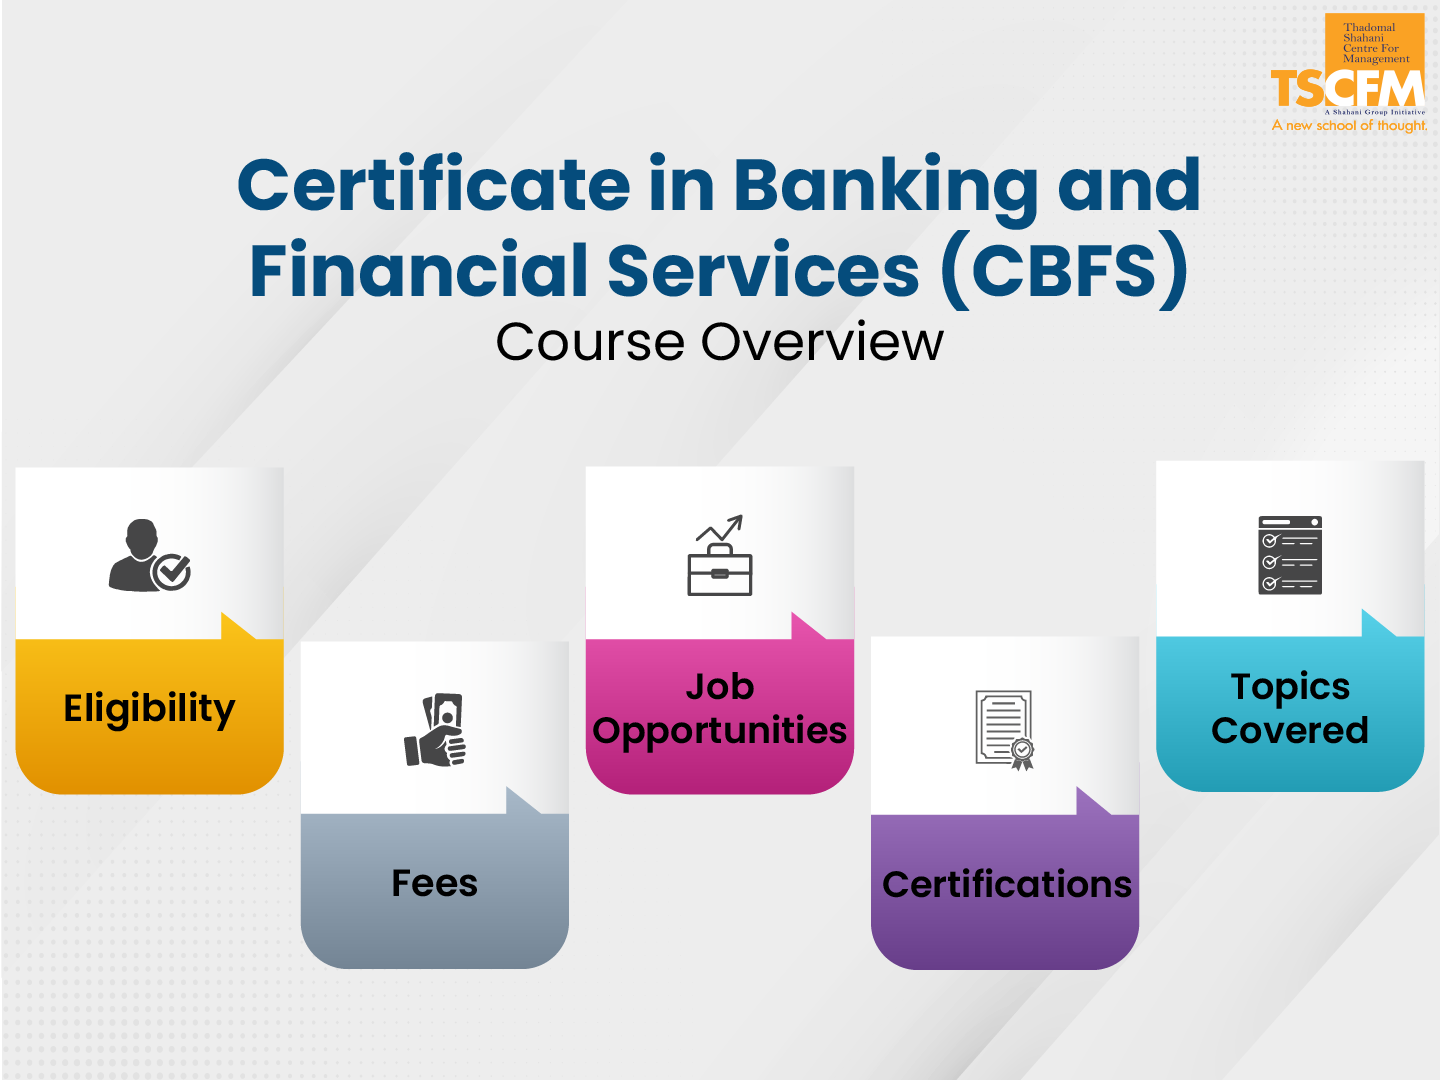 Certificate in Banking and Financial Services (CBFS): Job Opportunities, Certifications, Eligibility, Fees